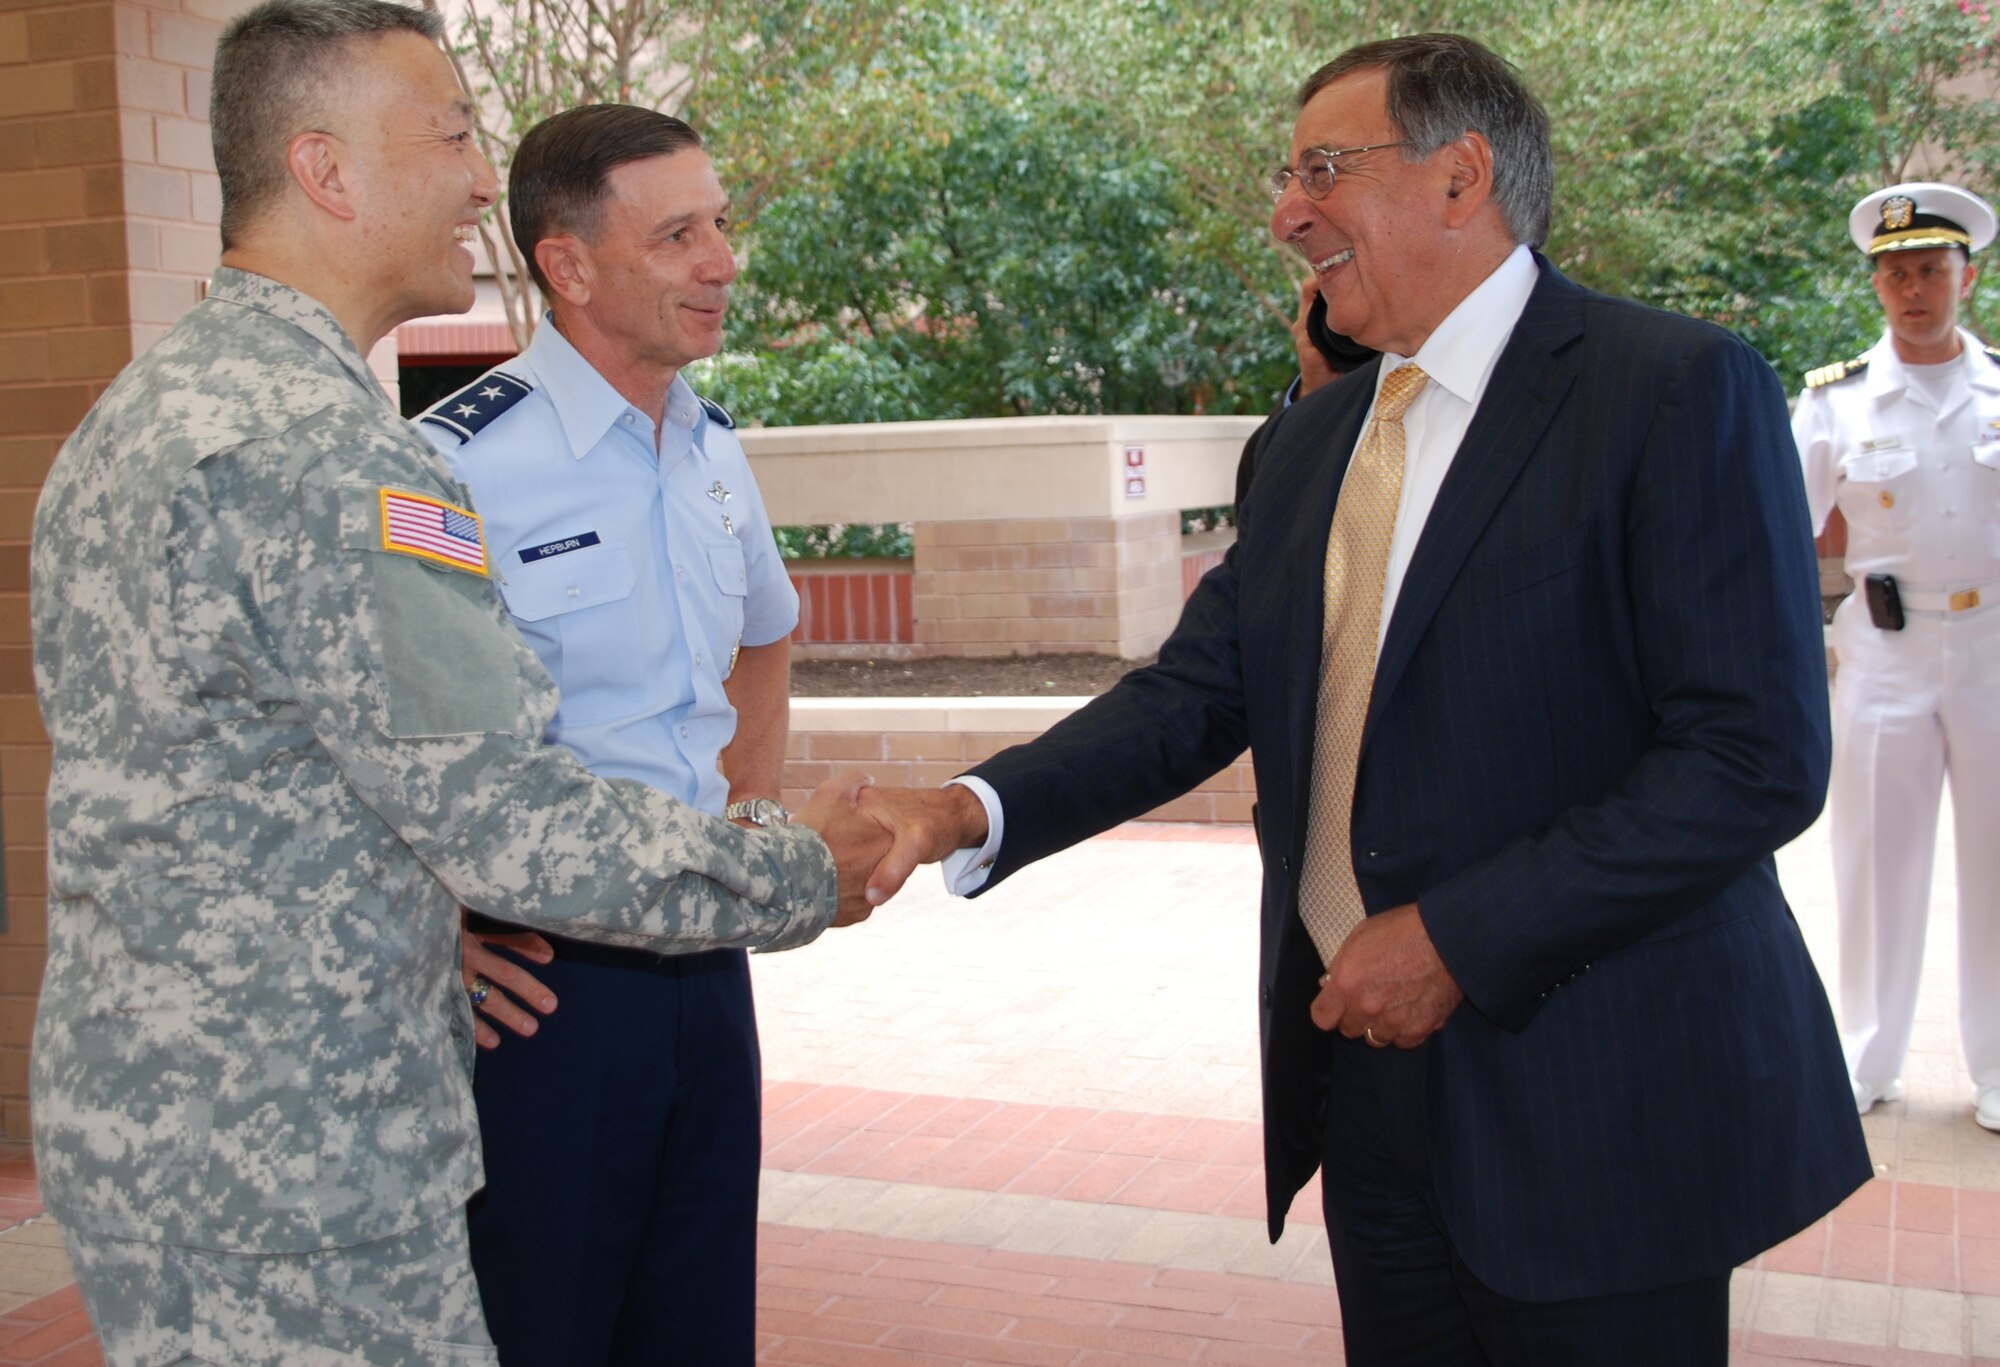 Defense Secretary Leon E. Panetta greets Army Maj. Gen. M. Ted Wong,
commander of Brooke Army Medical Center, and Air Force Maj. Gen. Byron
Hepburn, commander of 59th Medical Wing, at San Antonio Military Medical
Center, June 27, 2012. Panetta spent the day visiting with wounded warriors
at the Center for the Intrepid and SAMMC, thanking each troop and their
families for their service and sacrifice.( U.S. Army photo by Maria Gallegos)